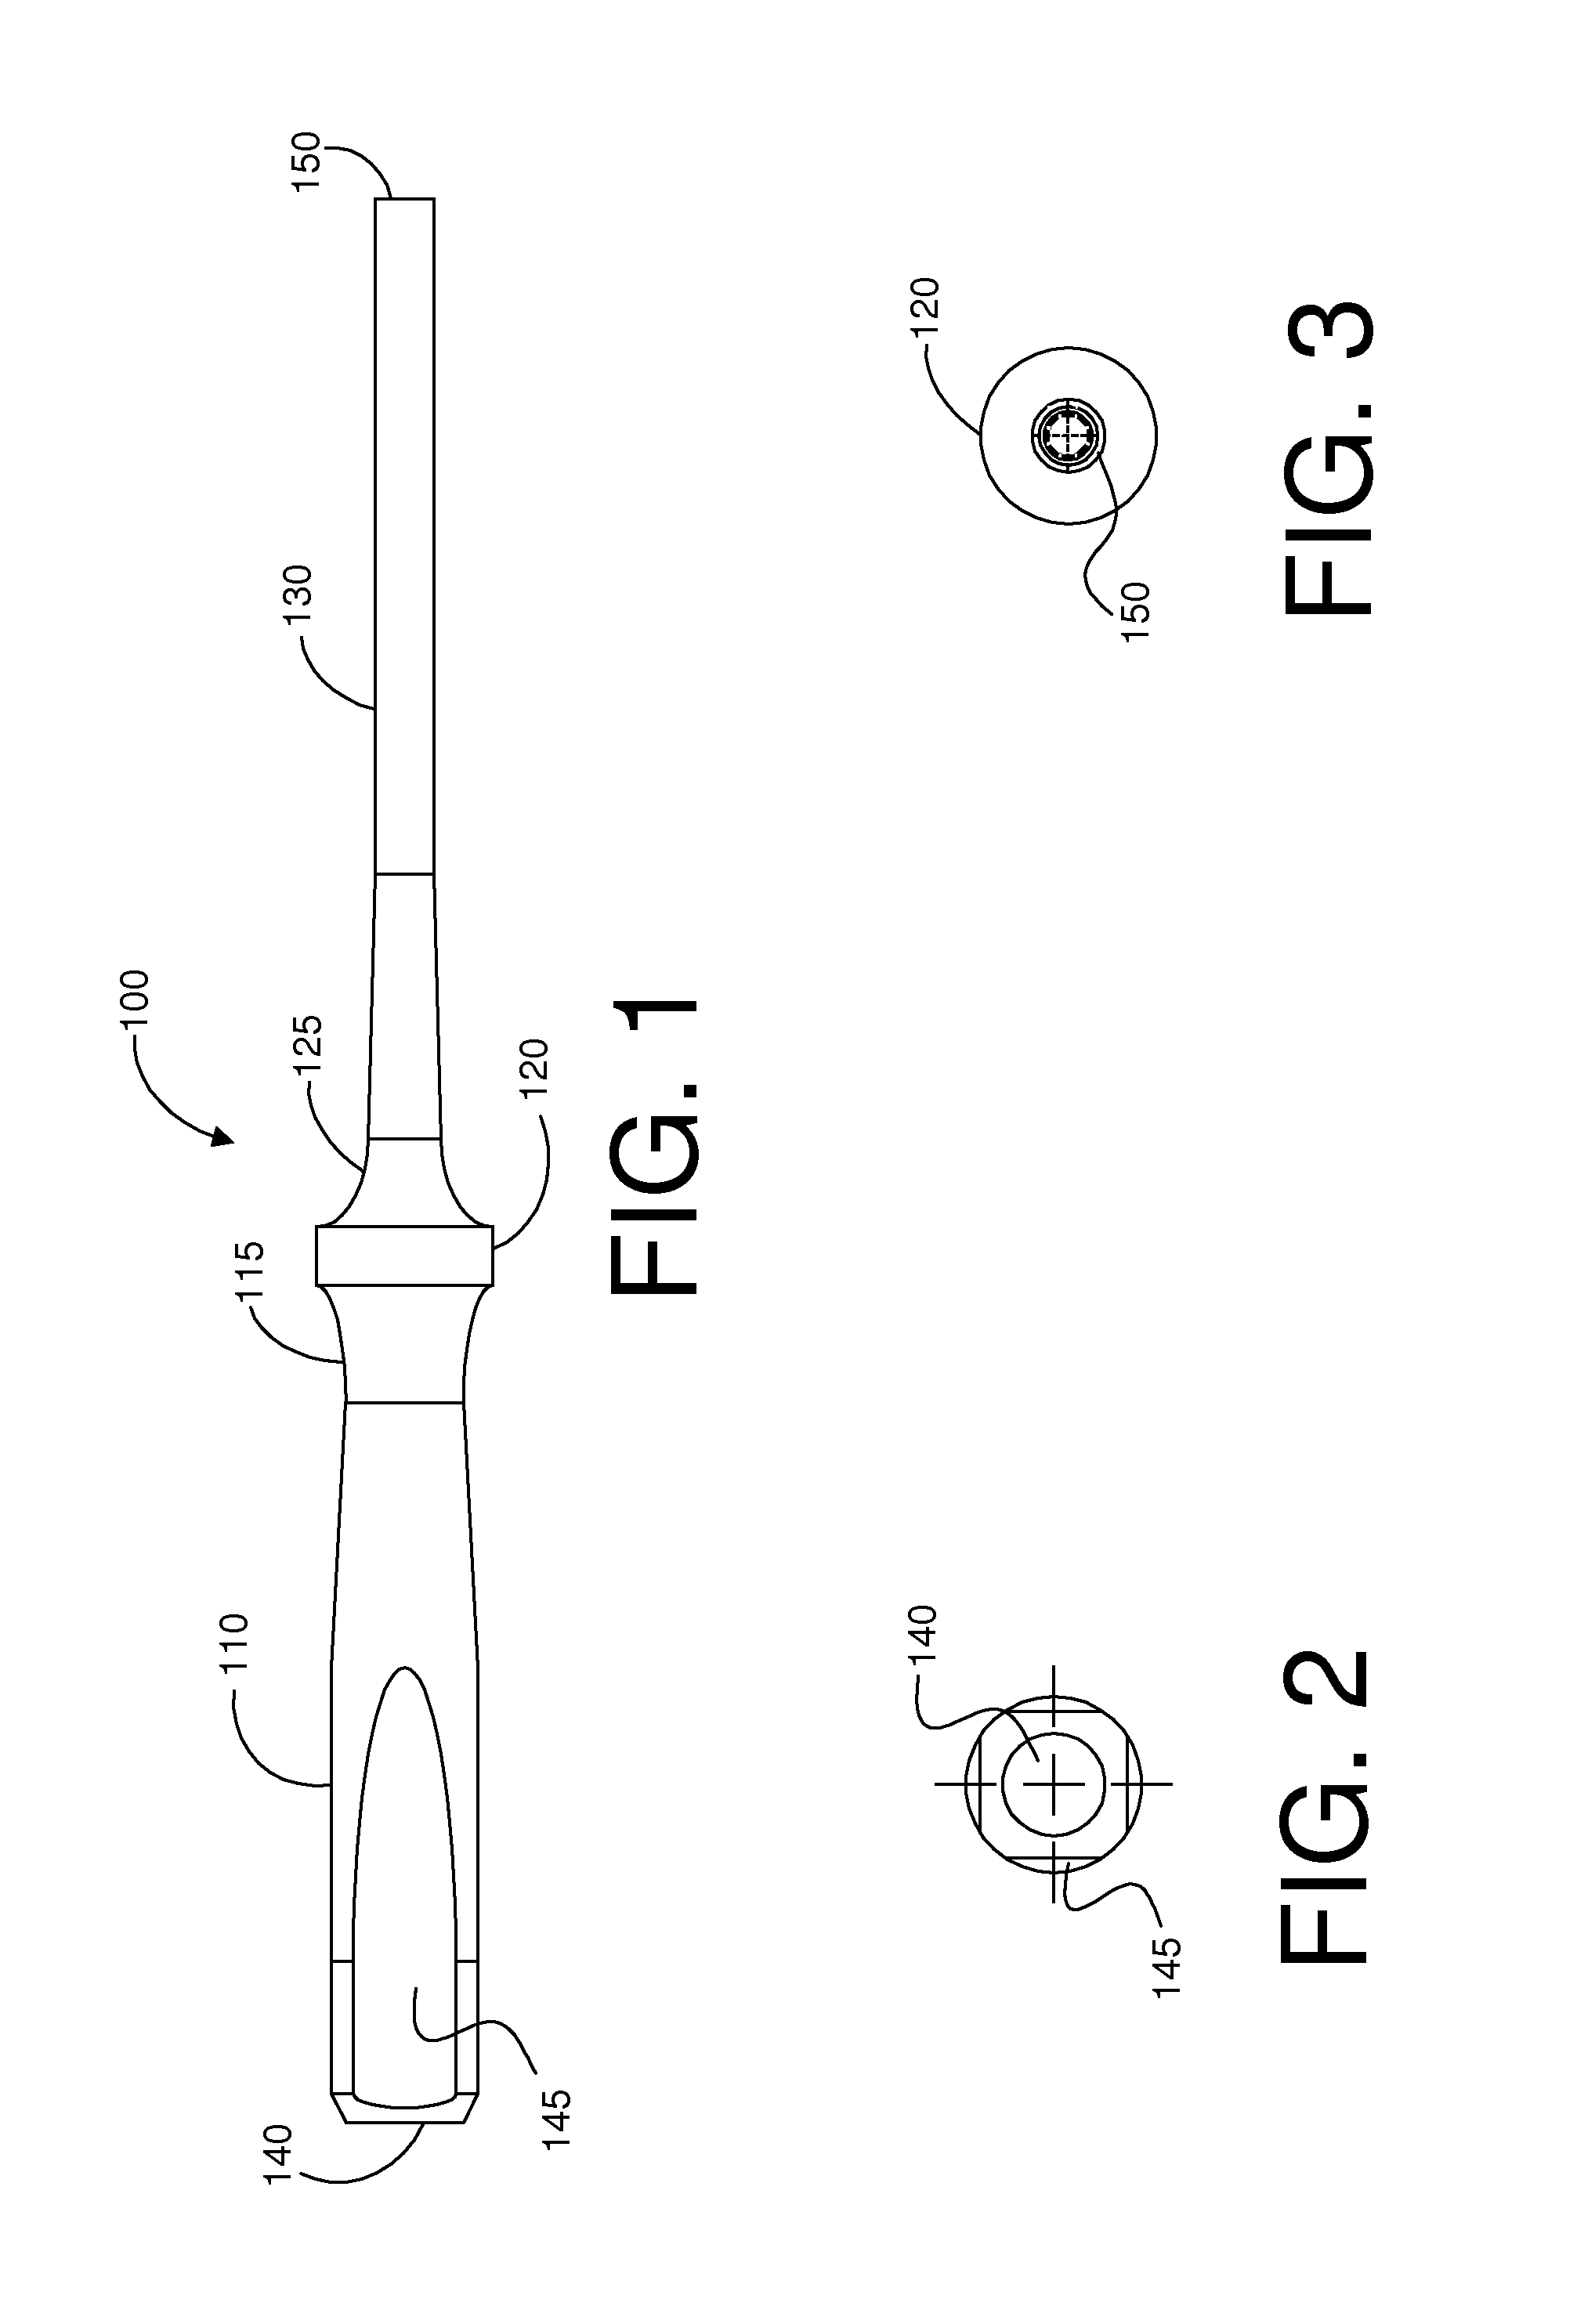 Dental implant driver and carrier removal system